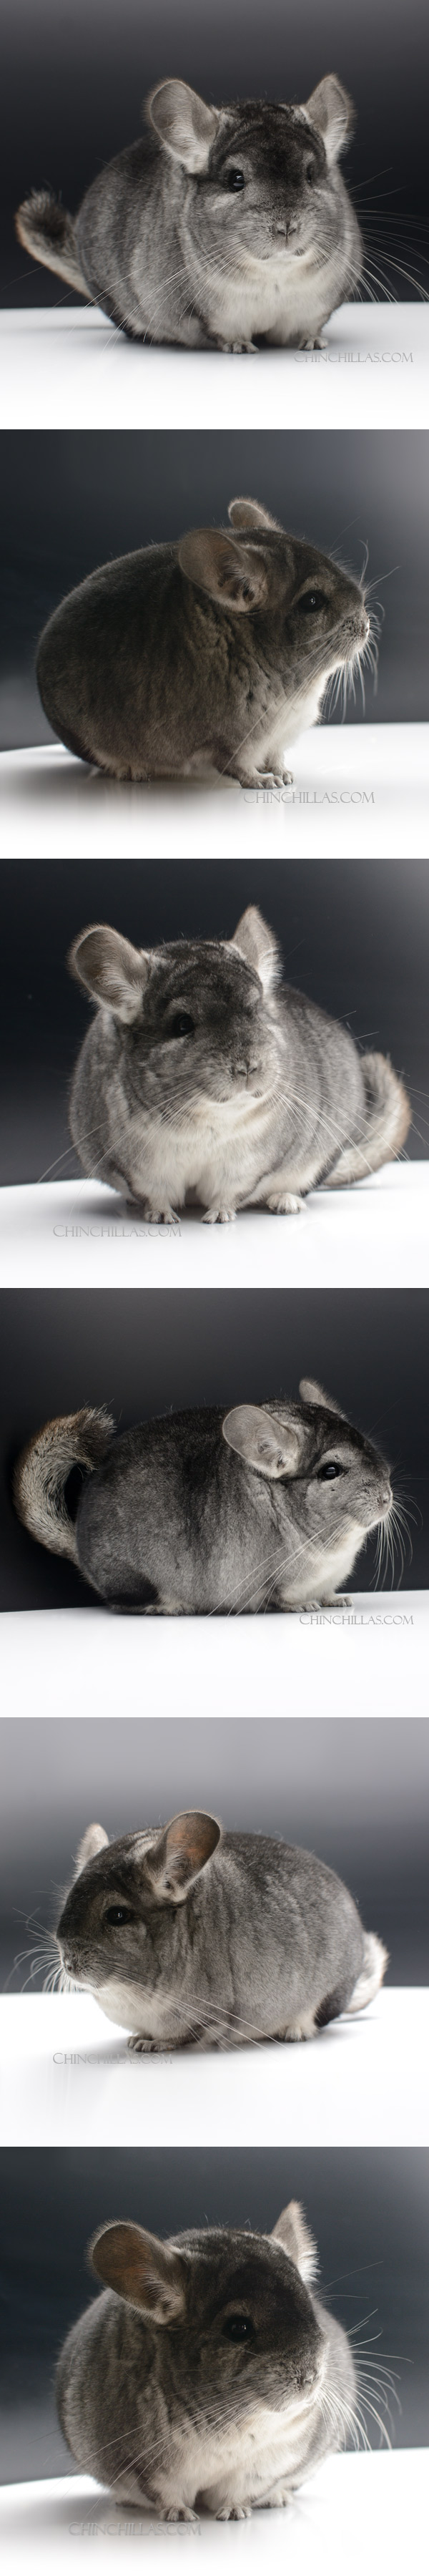 Chinchilla or related item offered for sale or export on Chinchillas.com - 24025 Large Blocky Premium Production Quality Standard Female Chinchilla